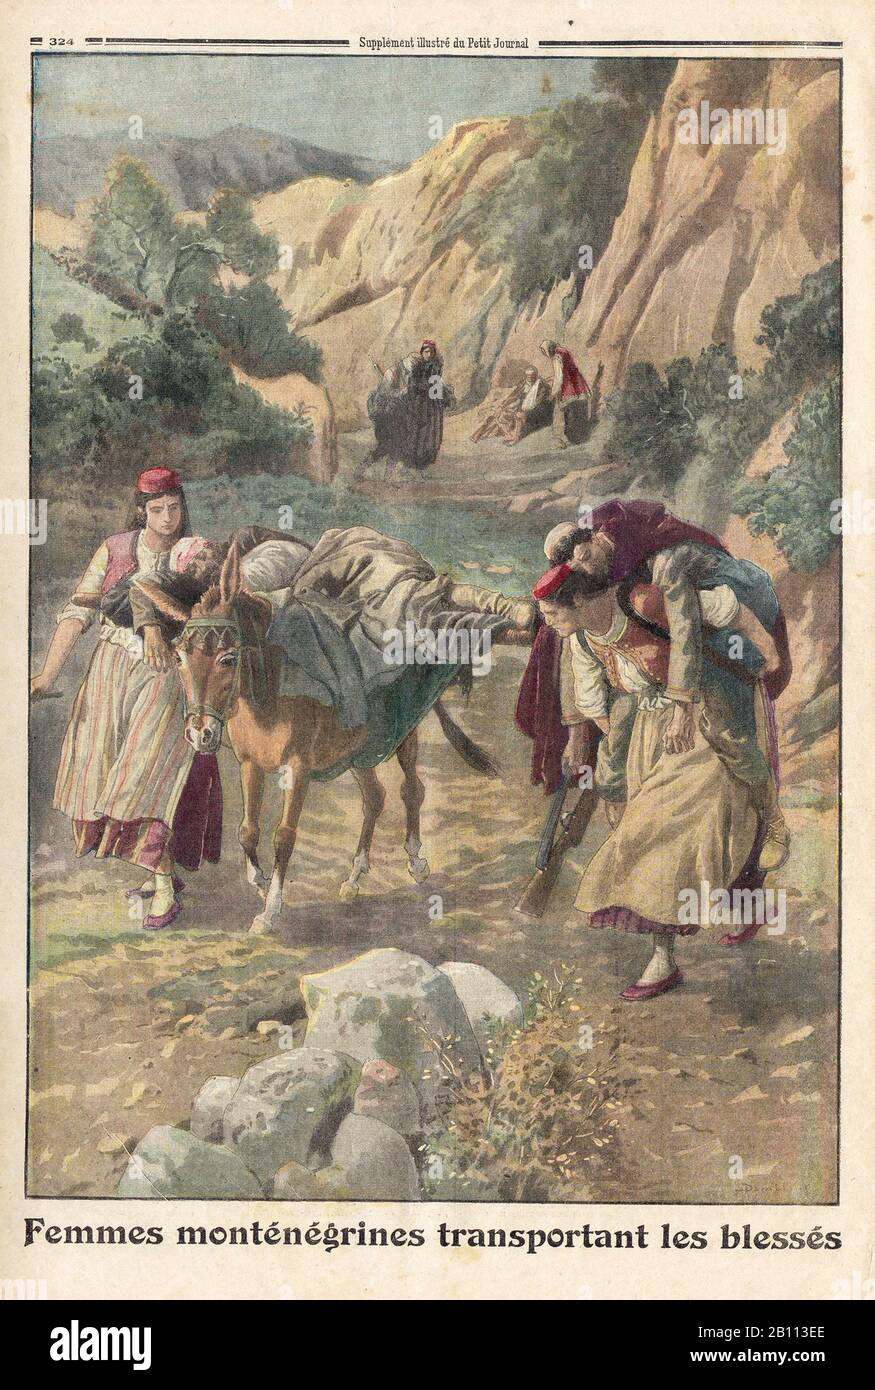 Femmes monténégrines transportant les blessés - Montenegrin women carrying the wounded - In 'Le Petit Journal' French Illustrated newspaper - Stock Photo